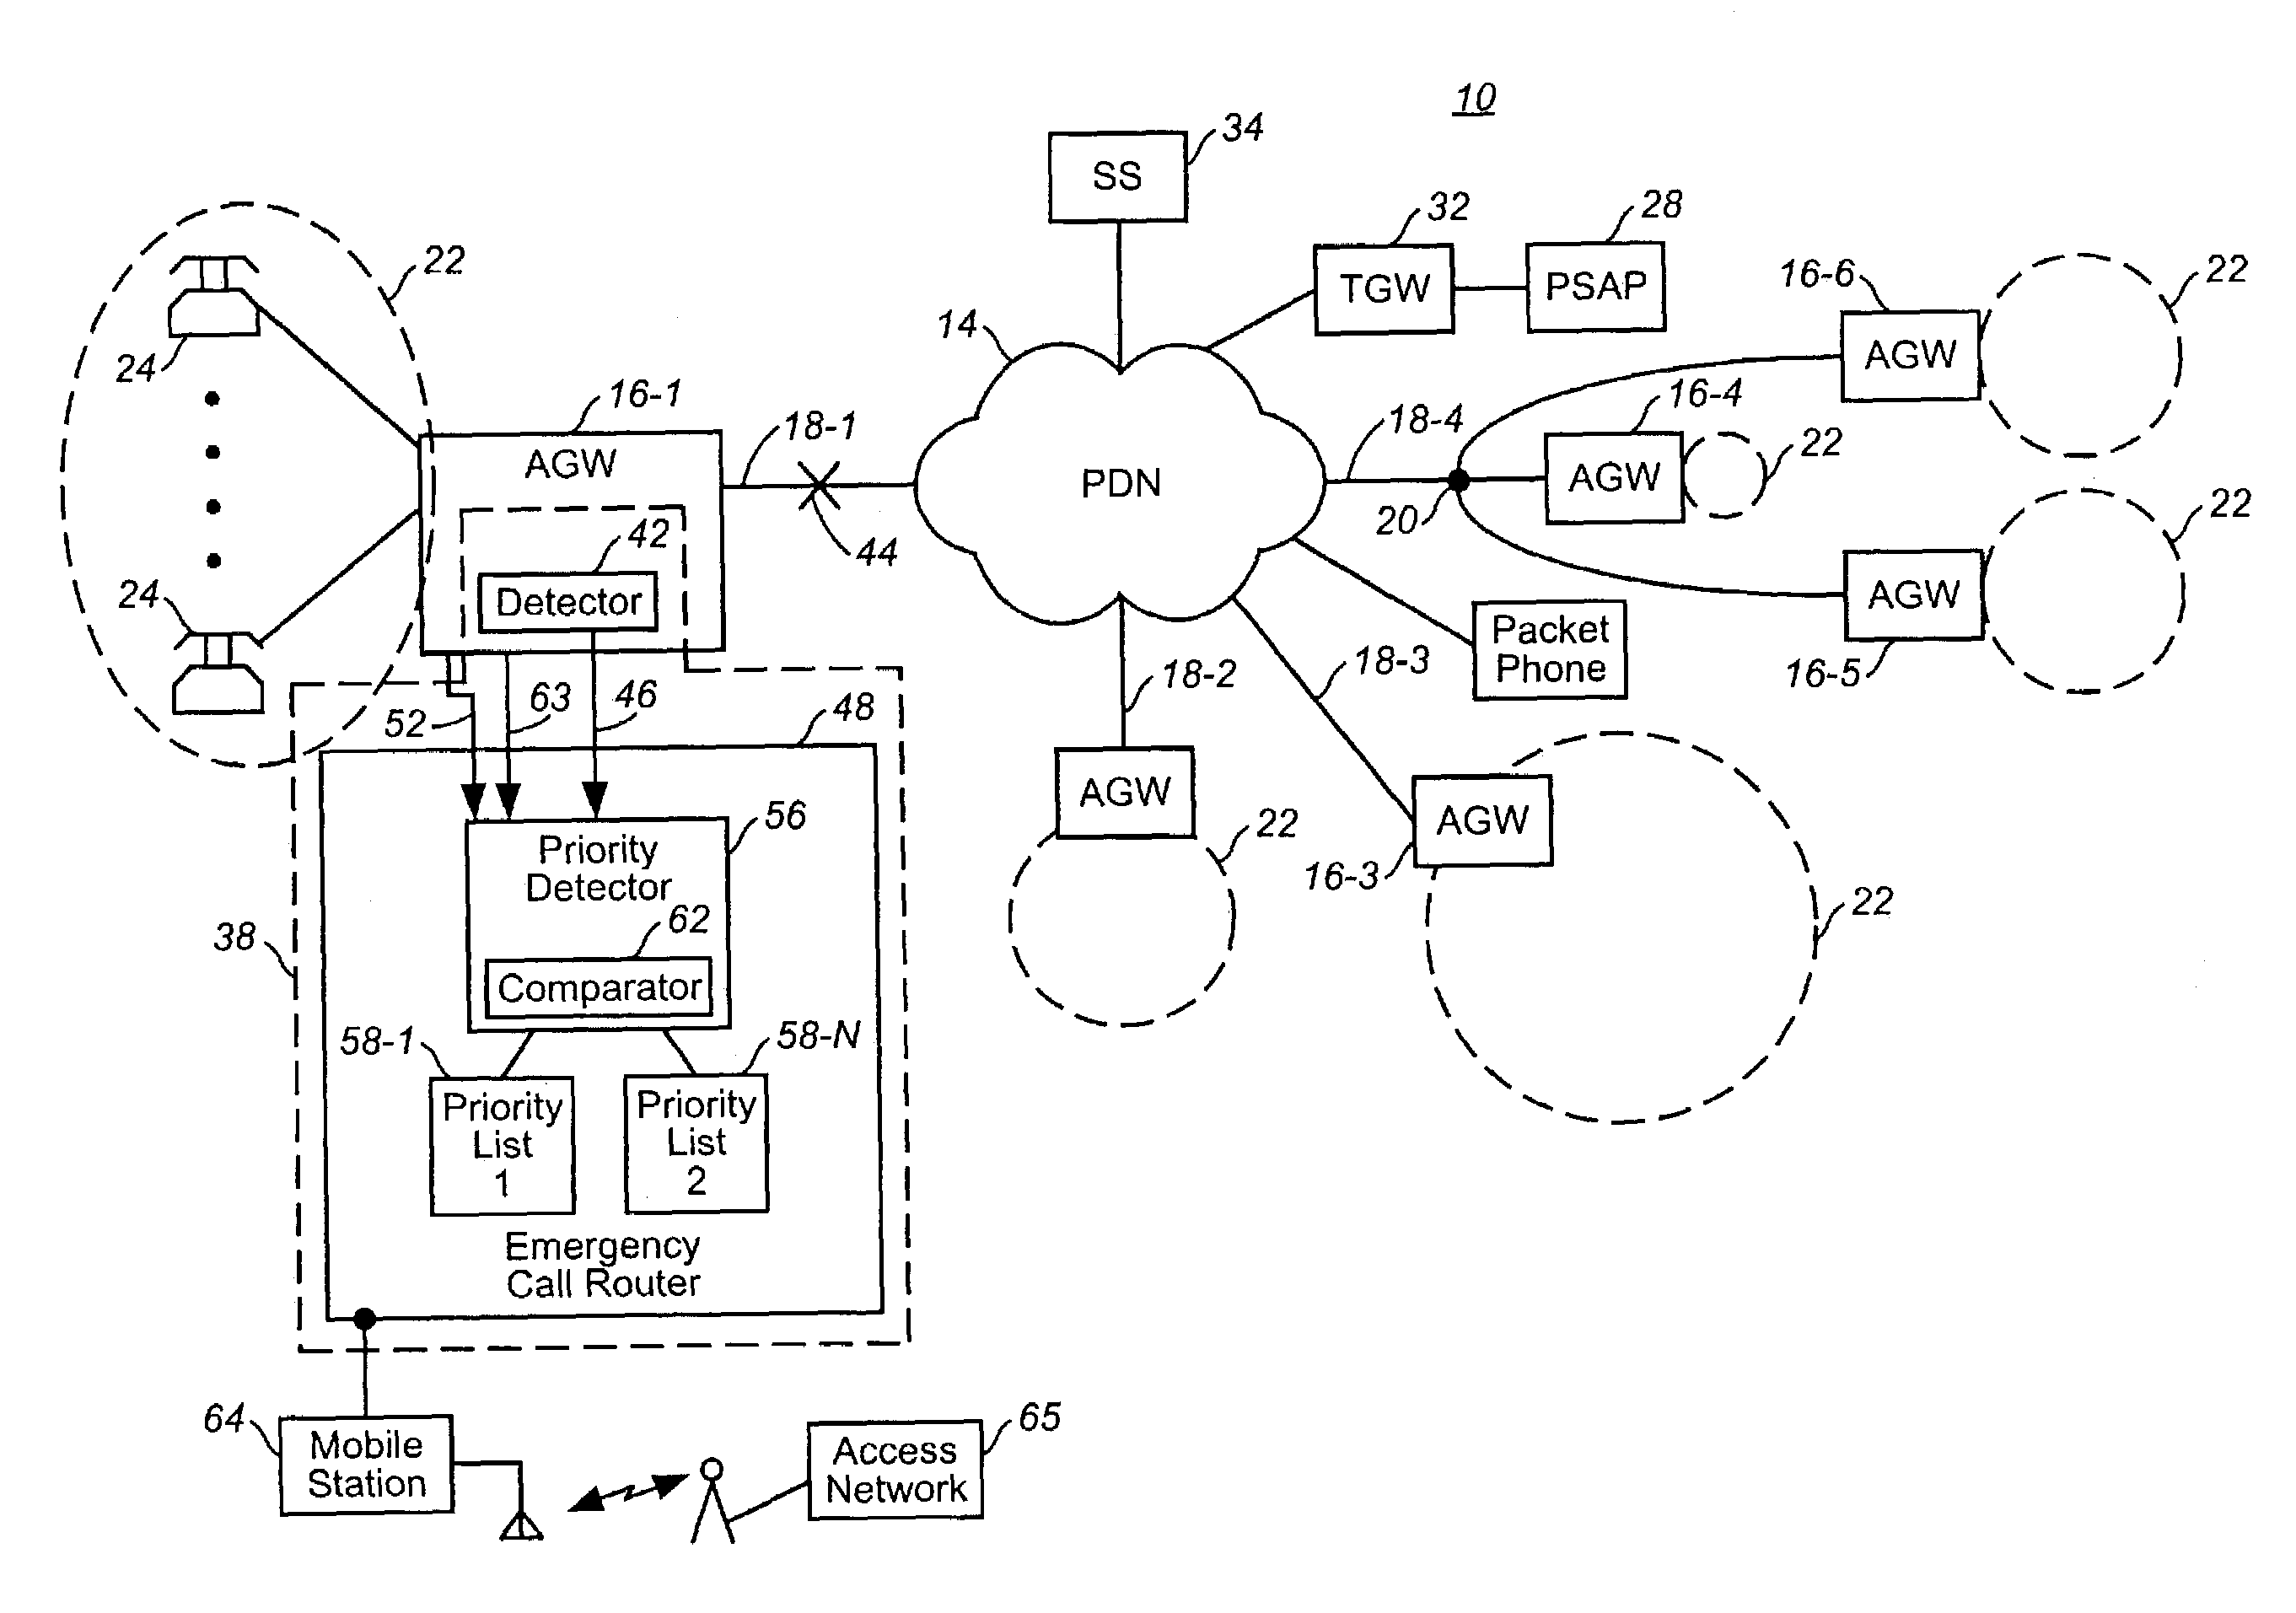 Call-routing apparatus, and associated method, for providing local call handling functions in a communication network